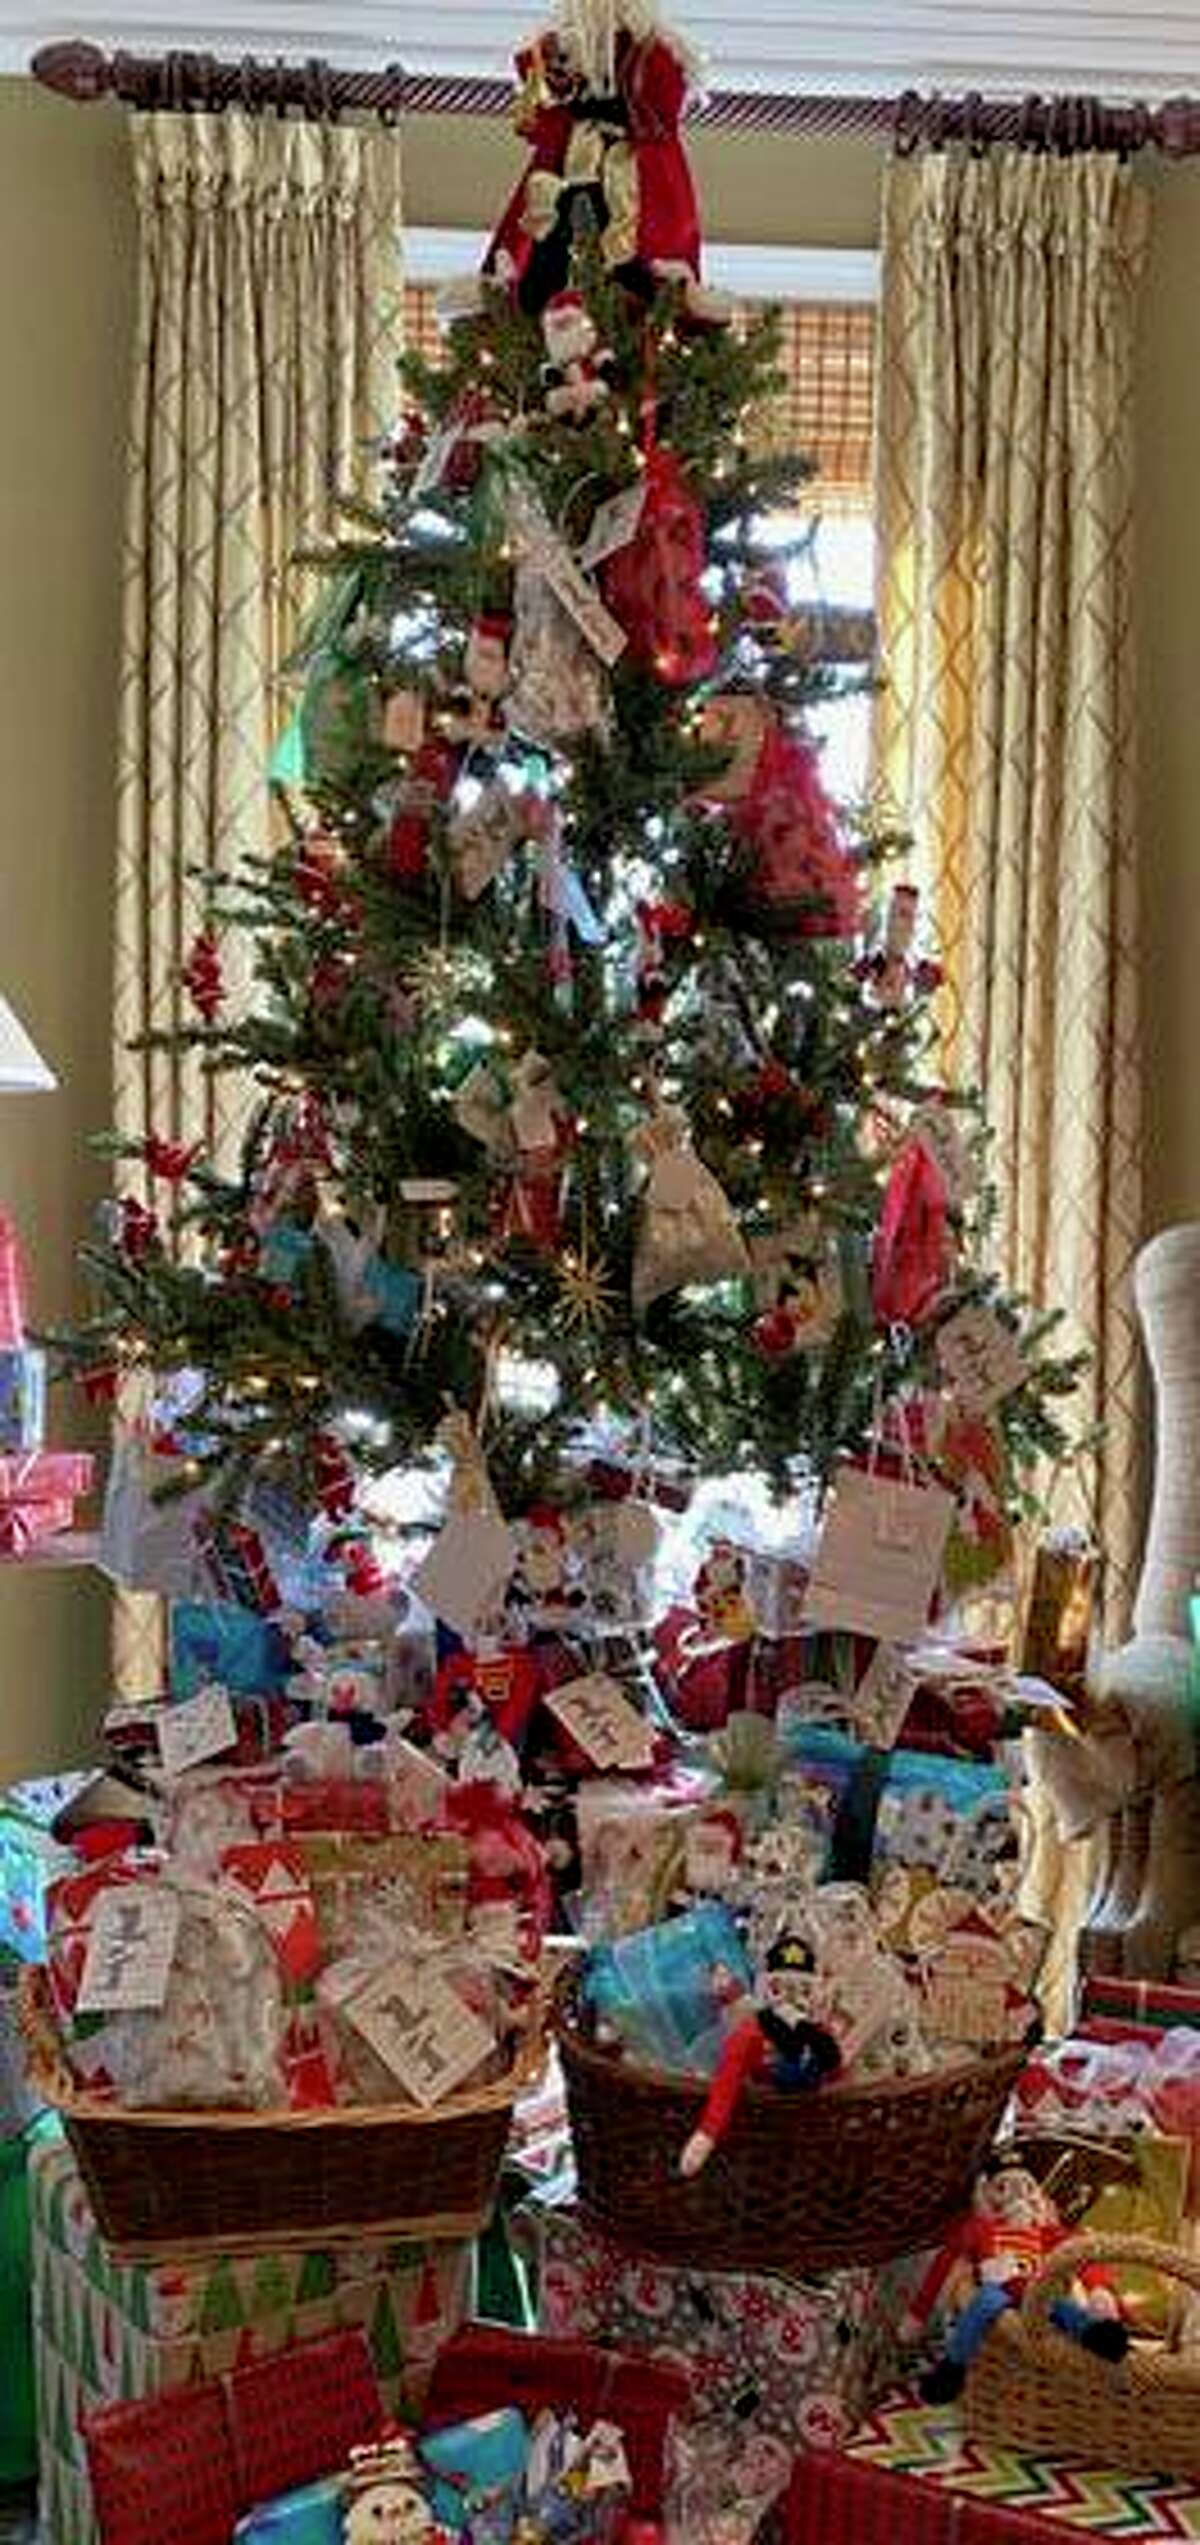 The Junior League of Greenwich created the The Children’s Giving Shop Tree as part of the The Enchanted Forest holiday celebration in December 2021. The completed tree was purchased by a generous donor, the Frascella Family Foundation, who in turn gifted the tree to Community Centers Inc.